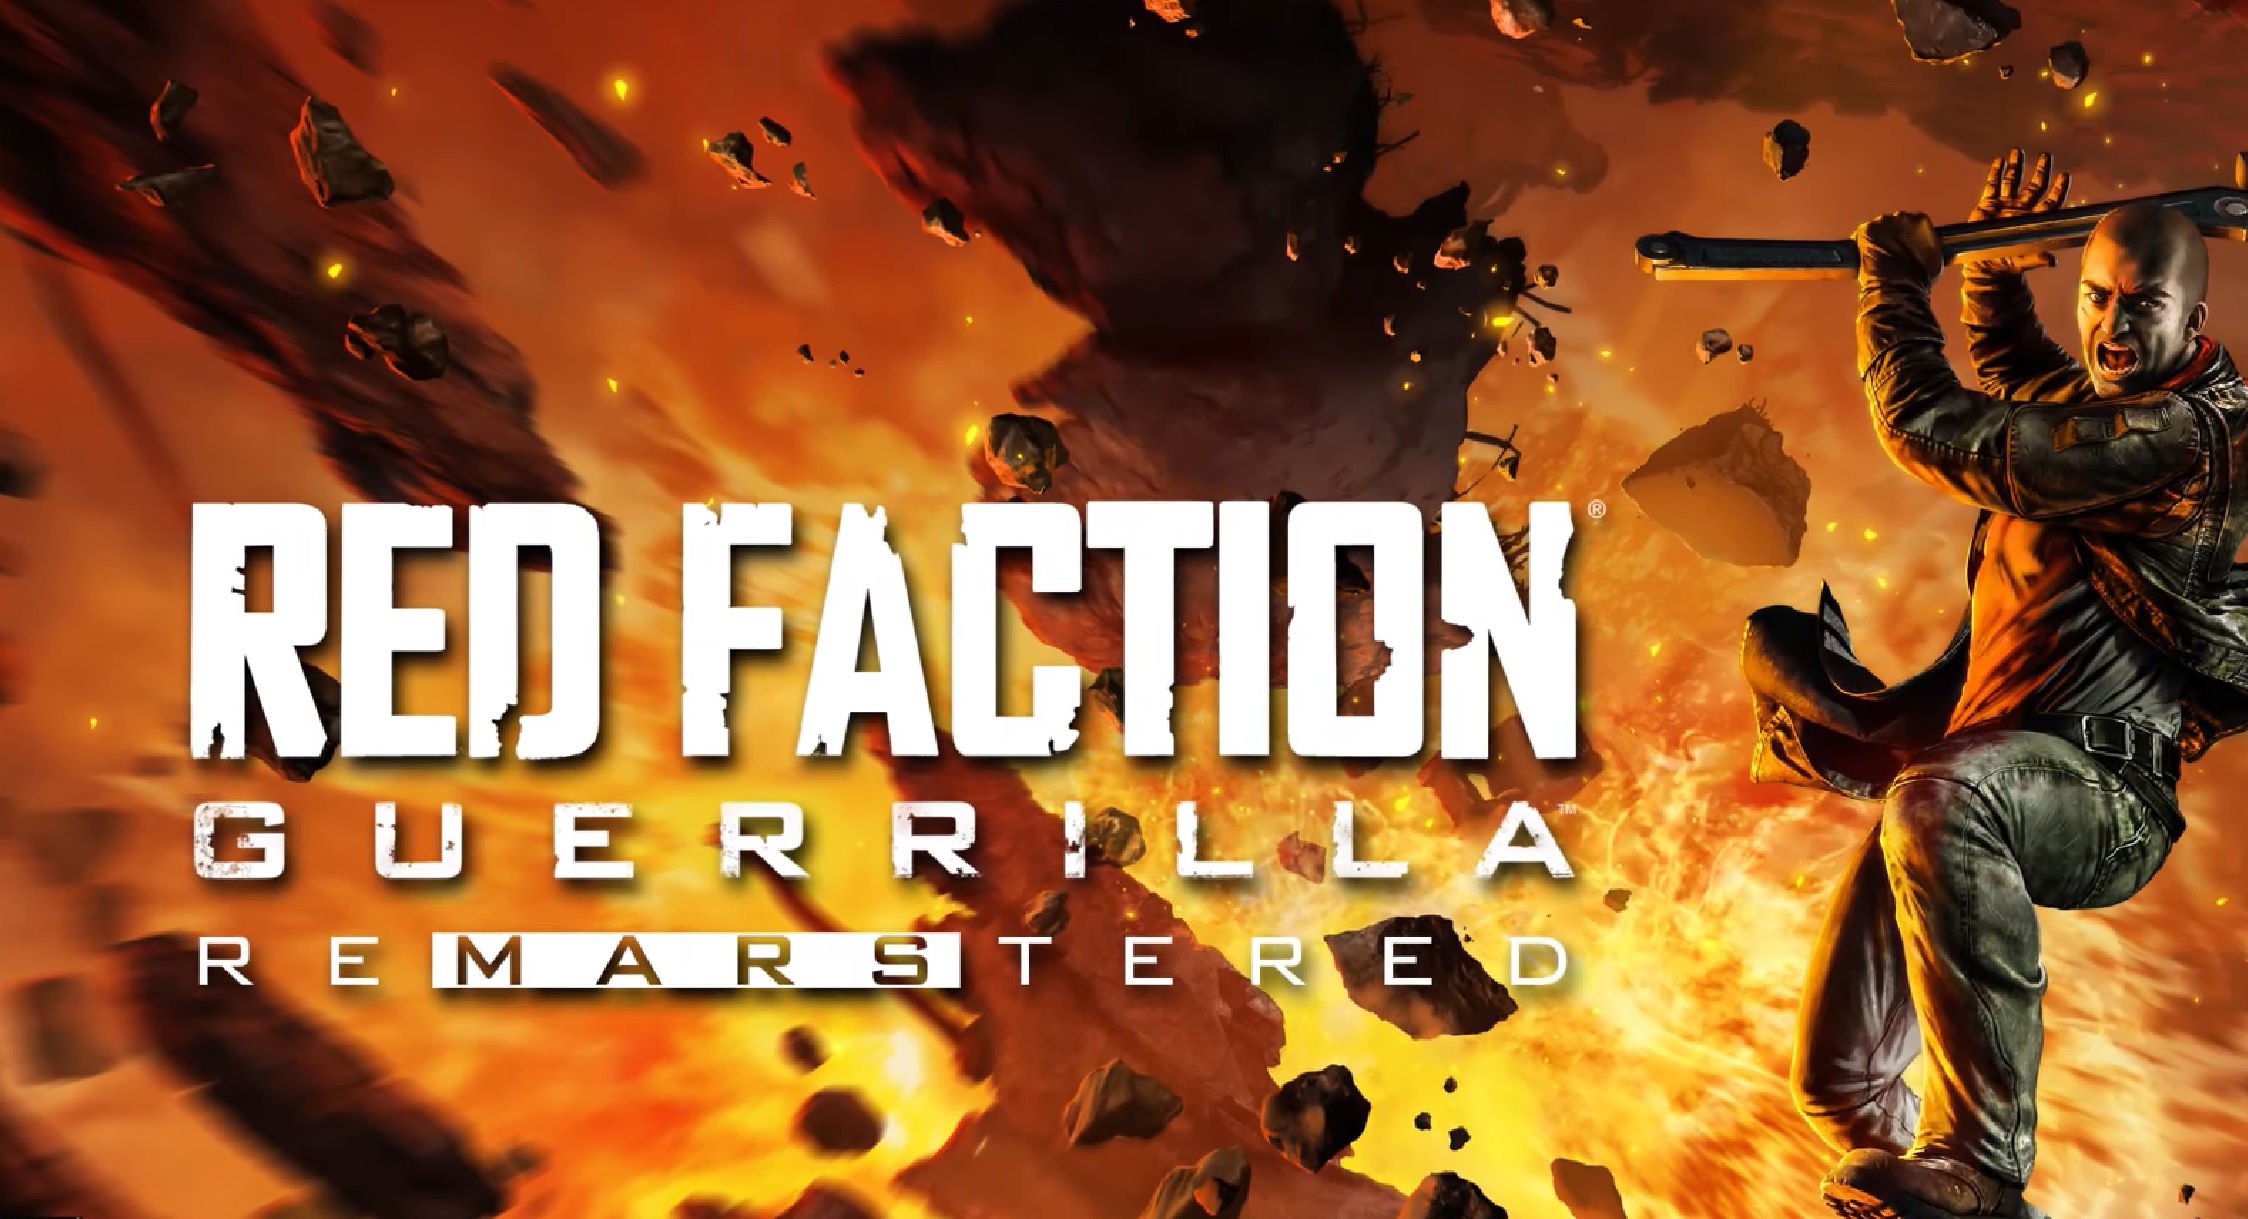 Red Faction Guerrilla Re-mars-tered Edition